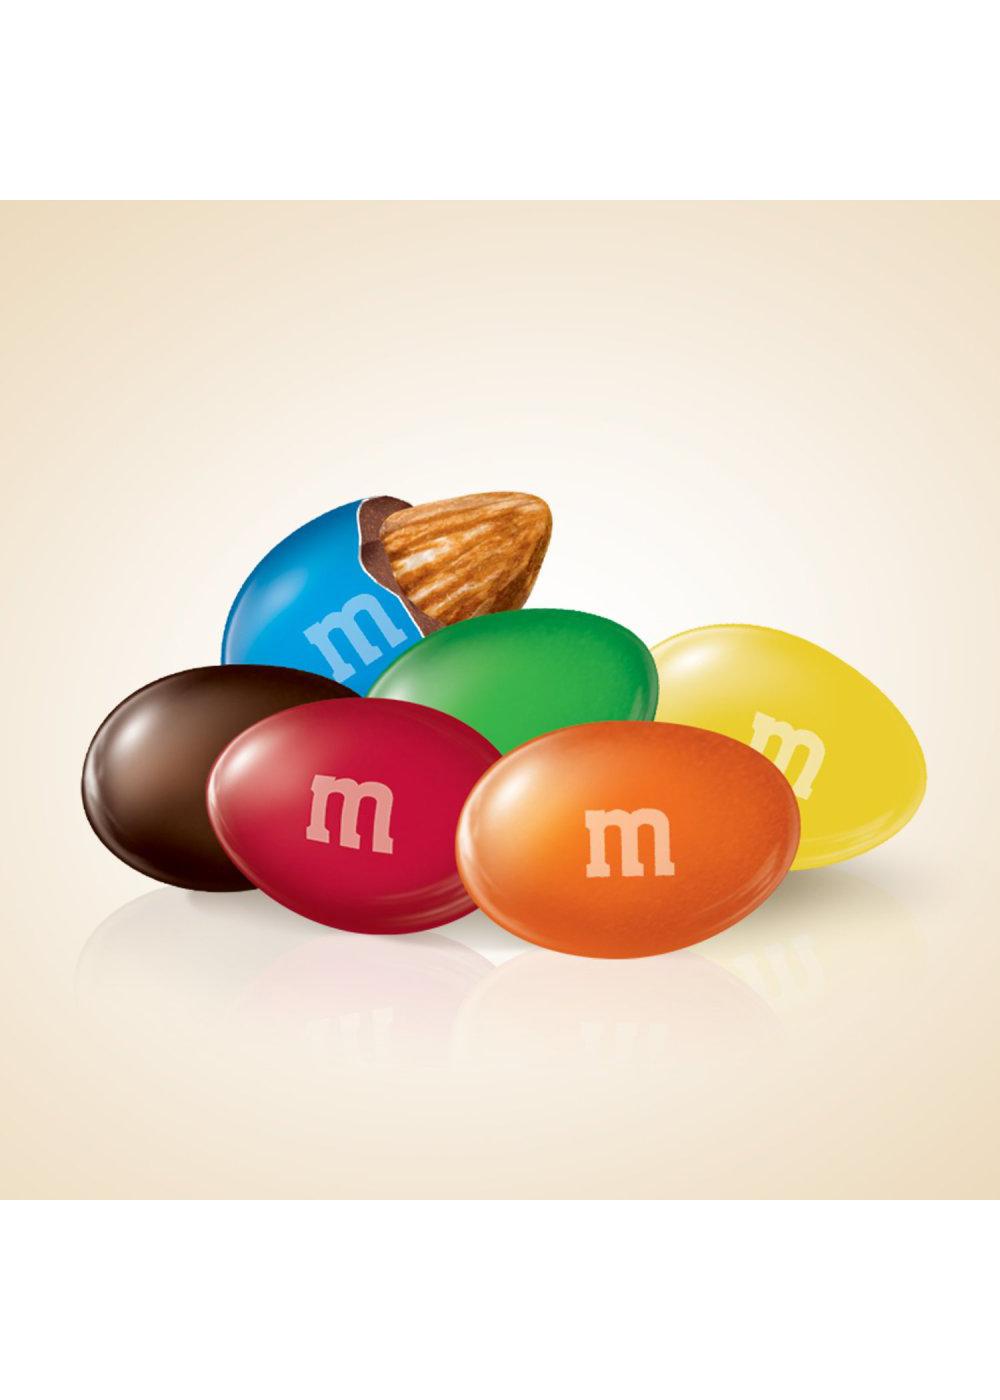 M&M'S Caramel Milk Chocolate Candy - Sharing Size - Shop Candy at H-E-B